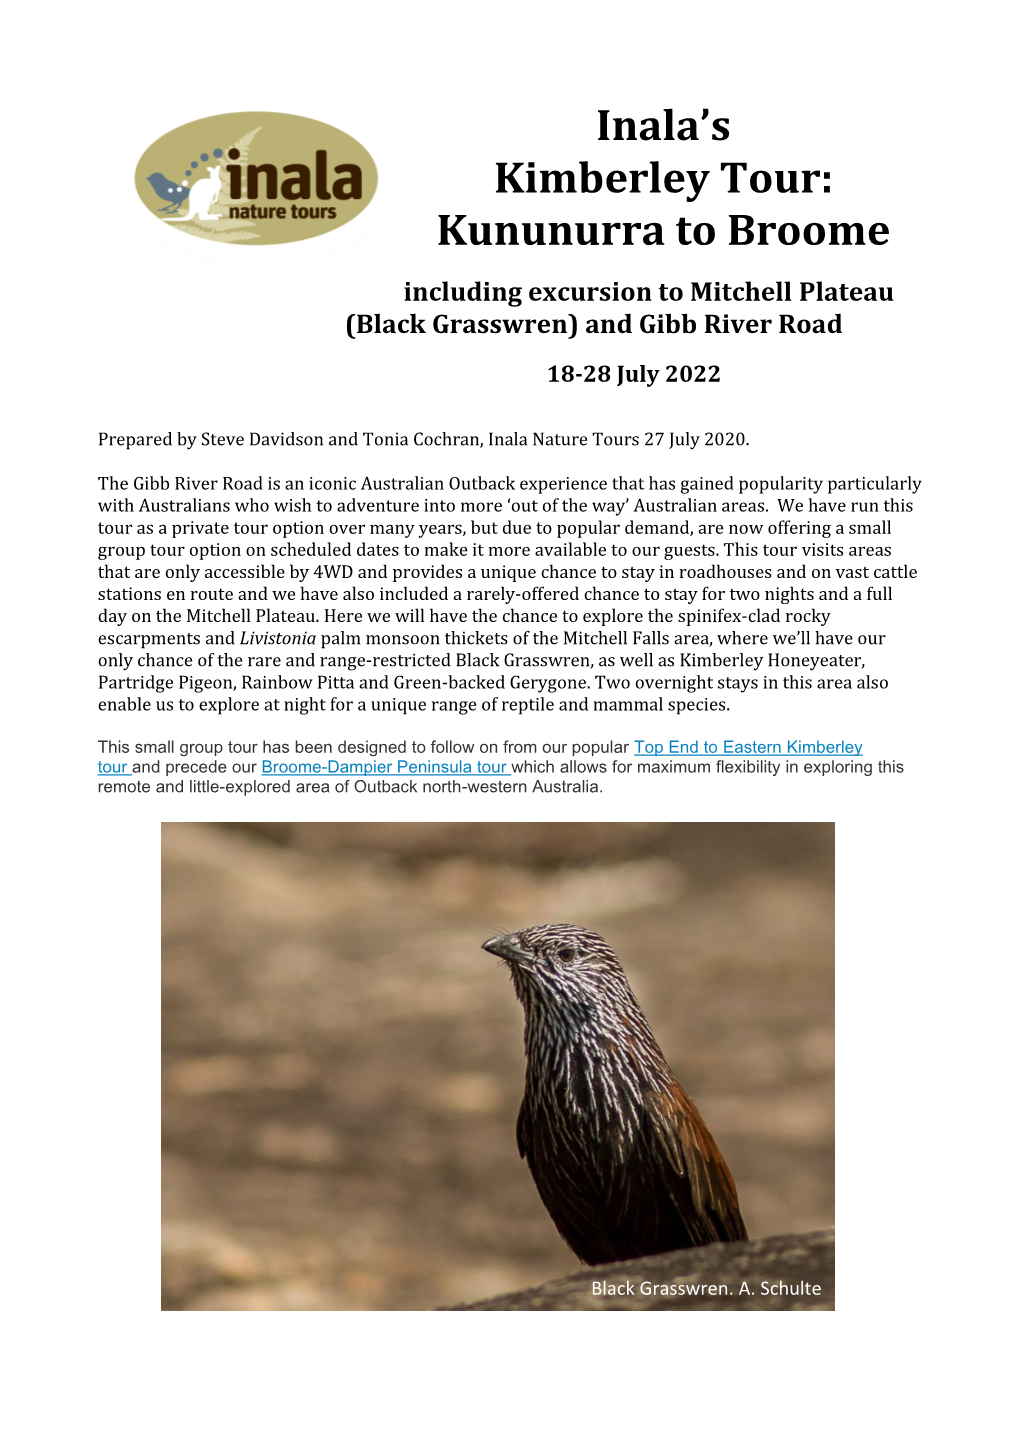 To Download the Itinerary for the Kununurra to Broome Tour